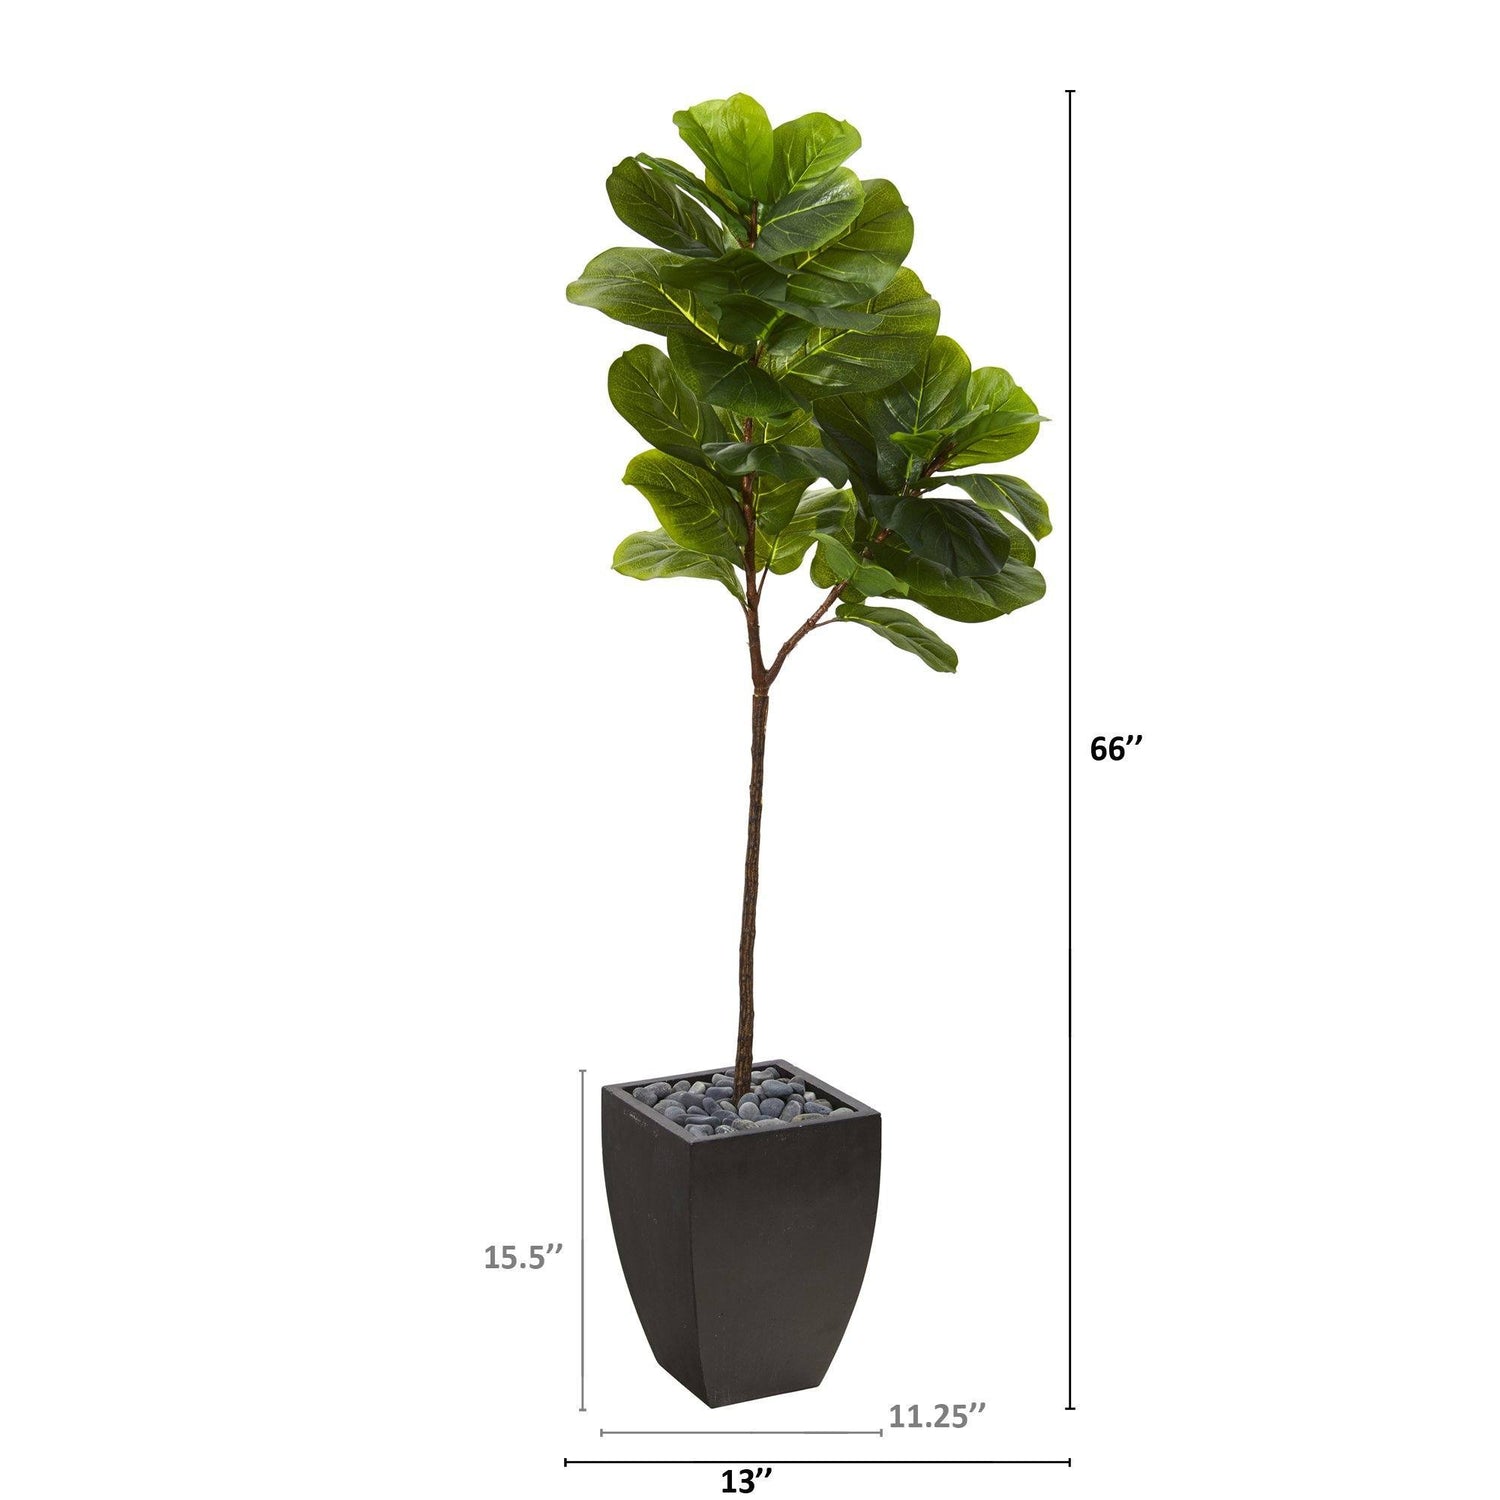 5.5’ Fiddle Leaf Artificial Tree in Black Planter (Real Touch)